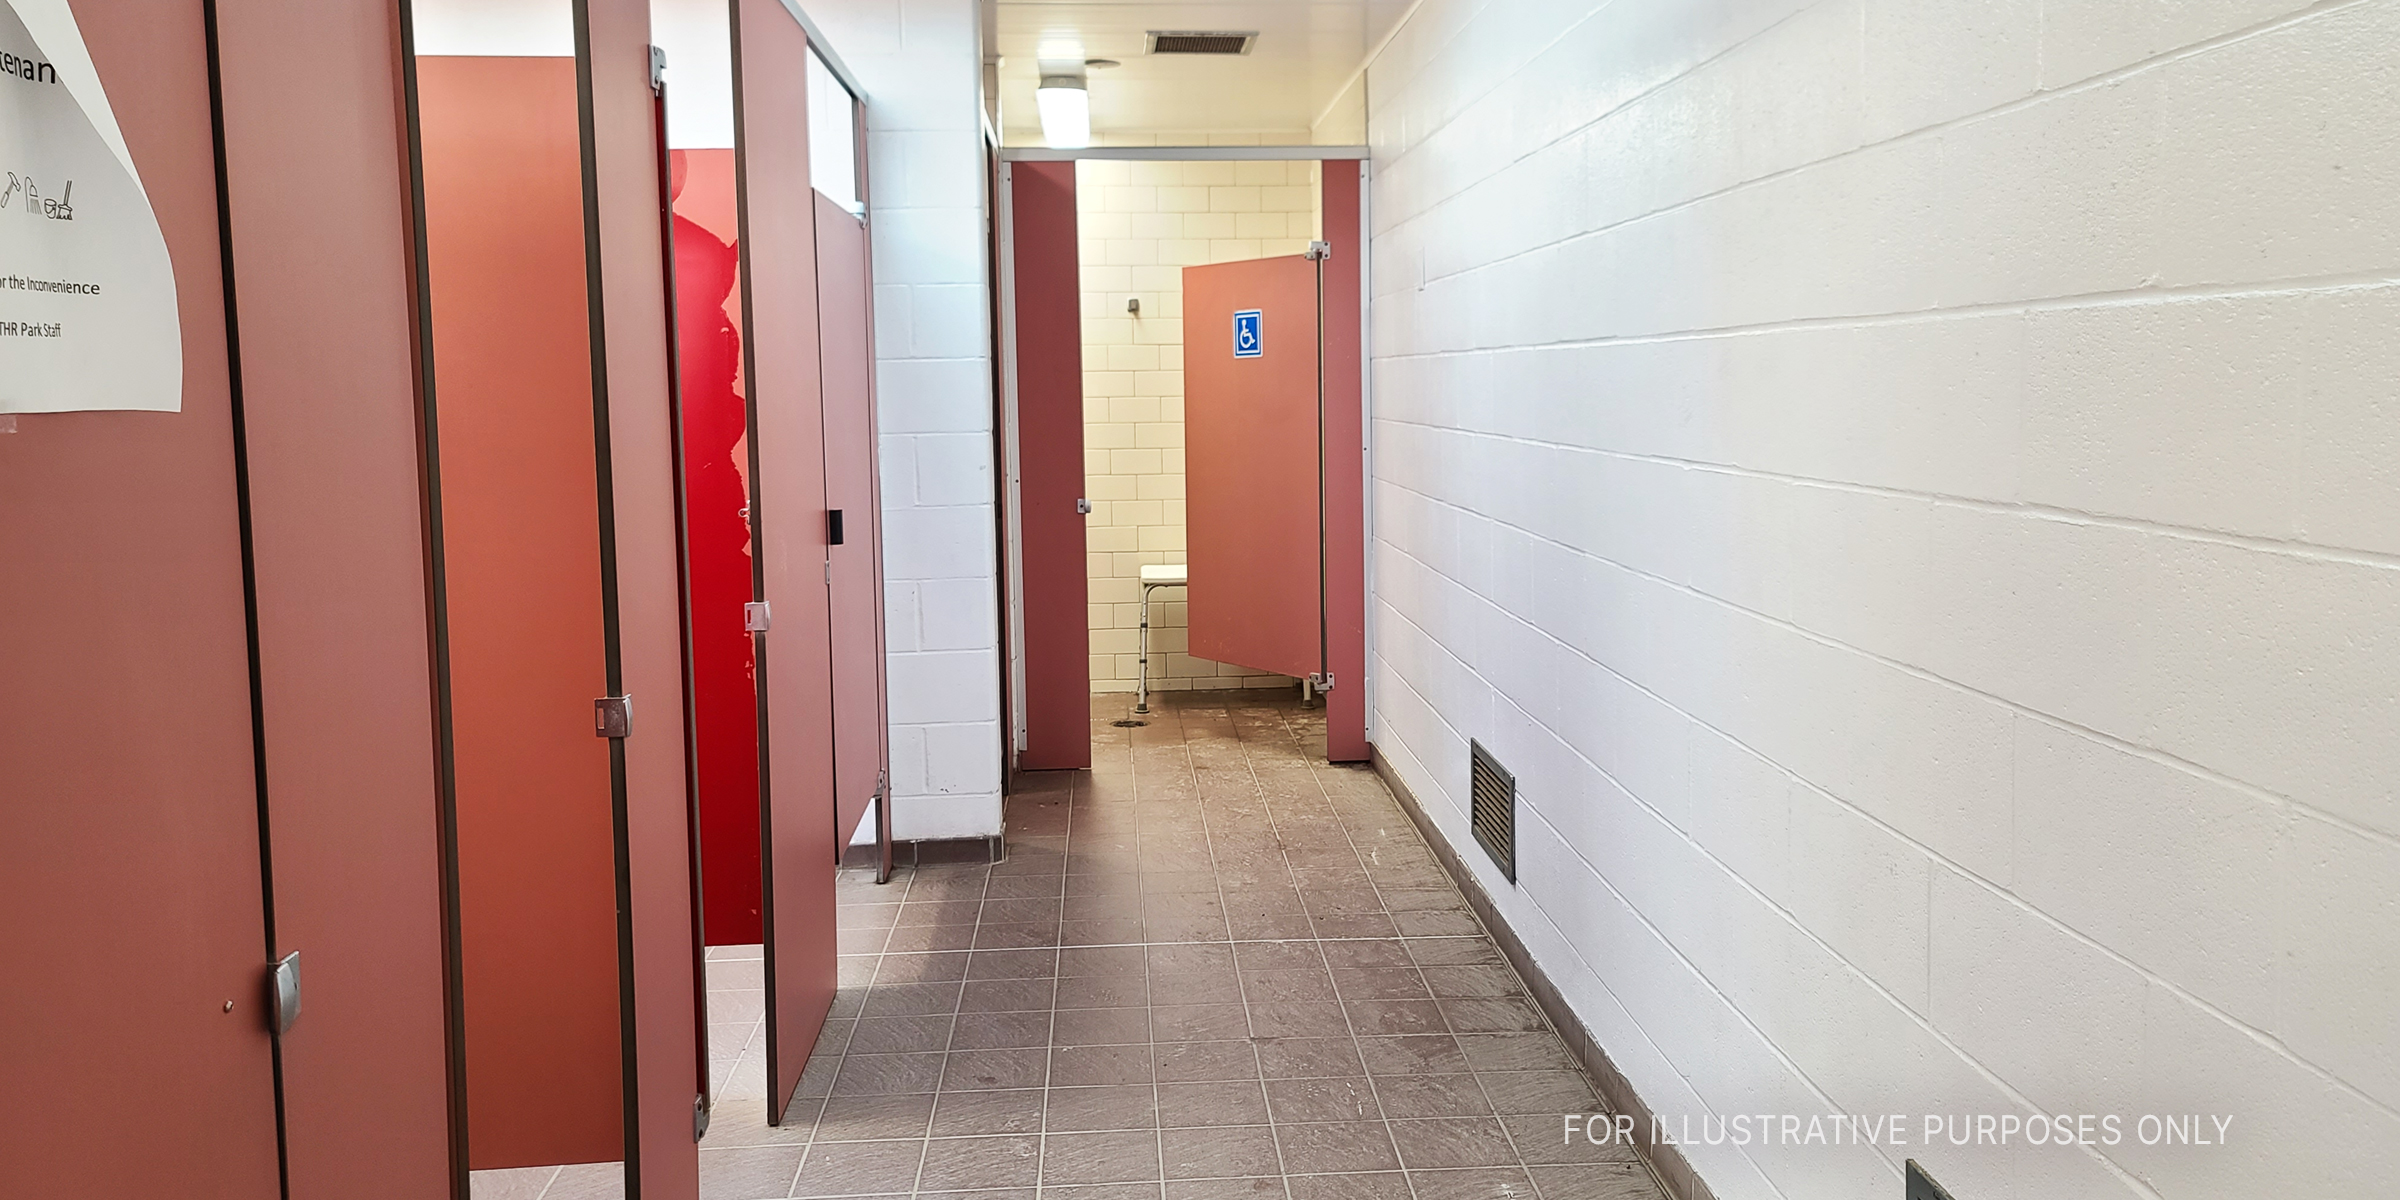 A row of bathroom stalls | Source: Shutterstock